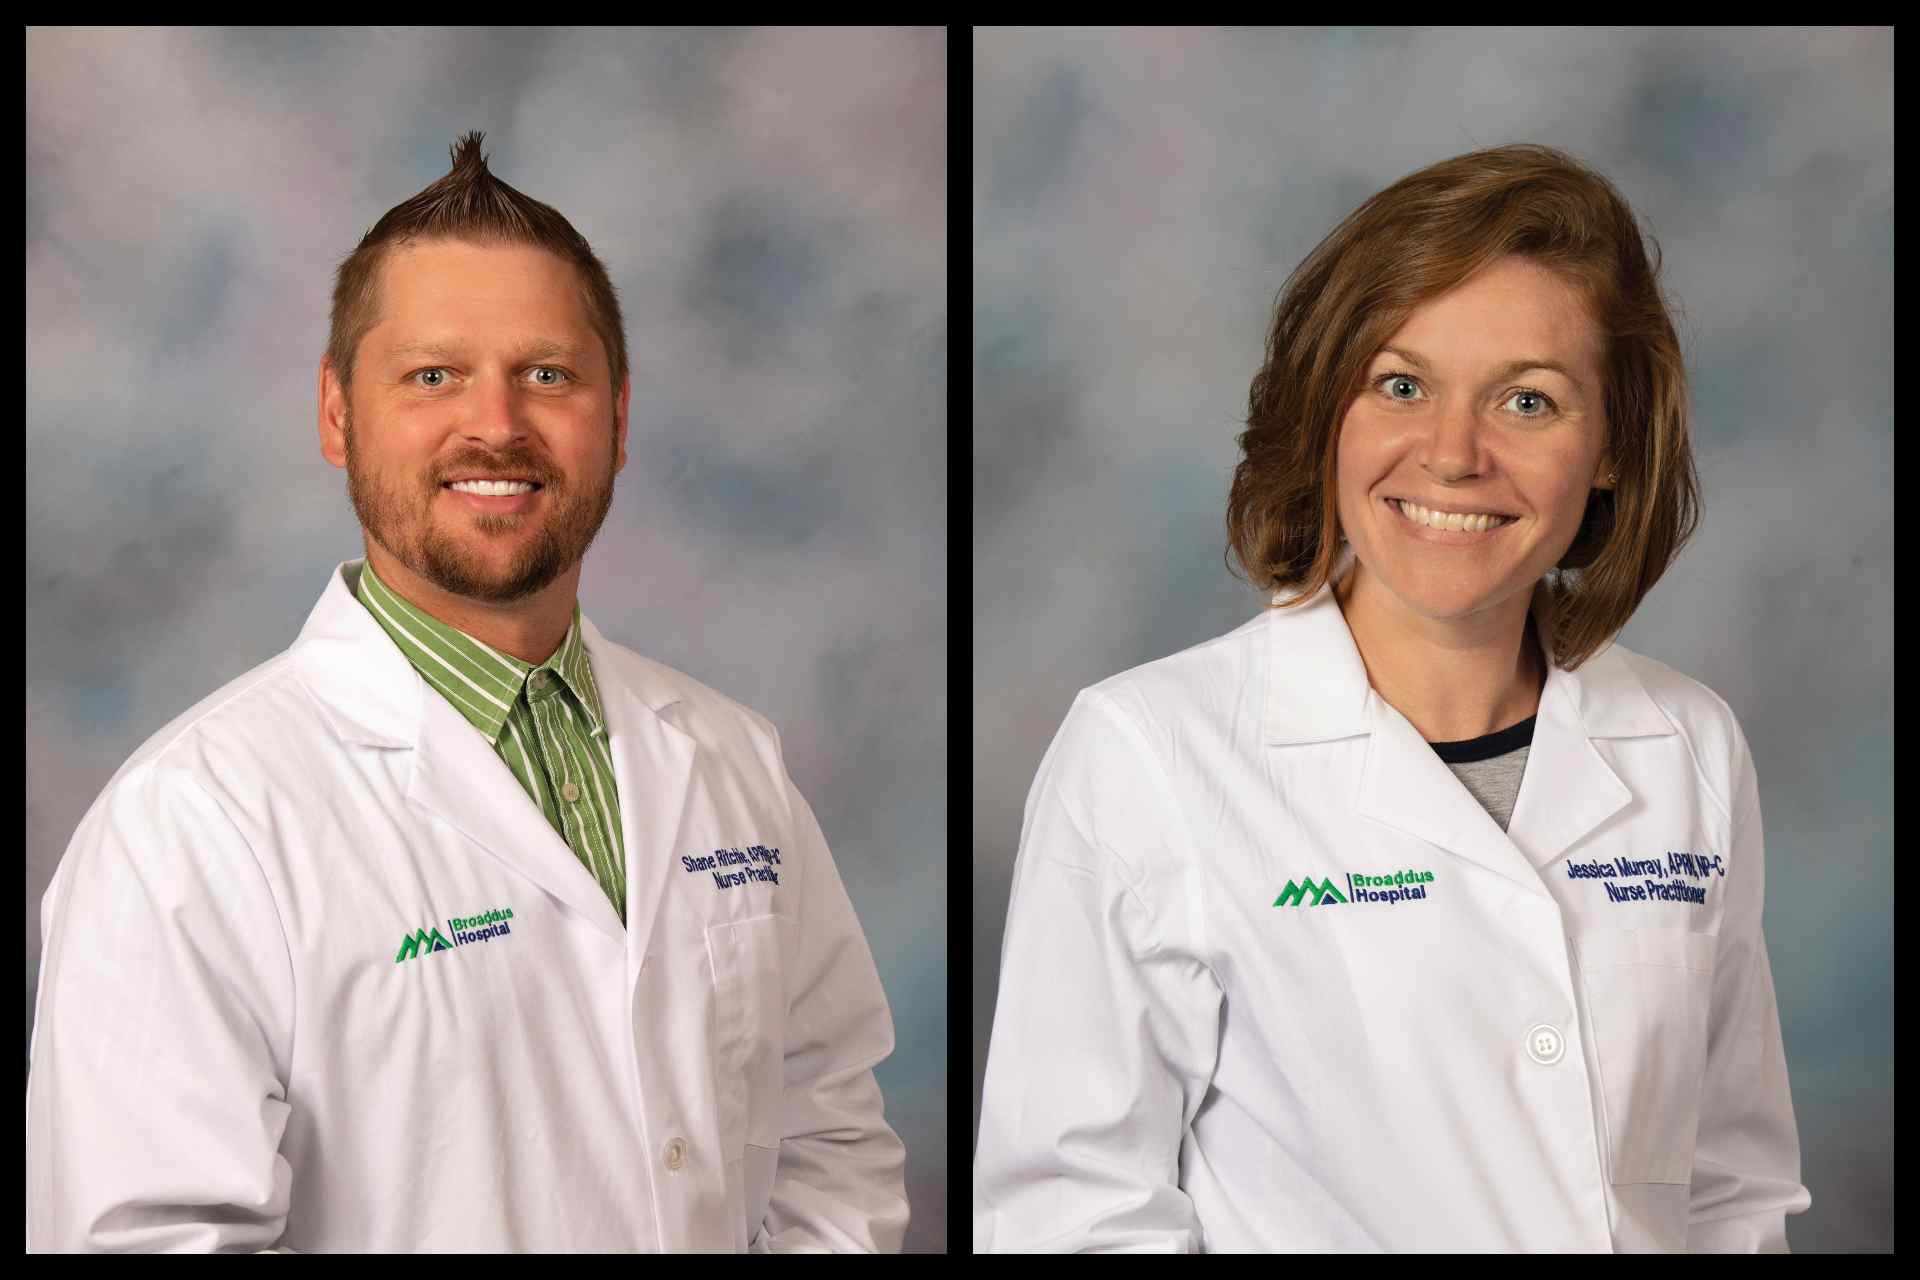 Shane Ritchie, APRN, FNP-BC, and Jessica Murray, APRN, NP-C